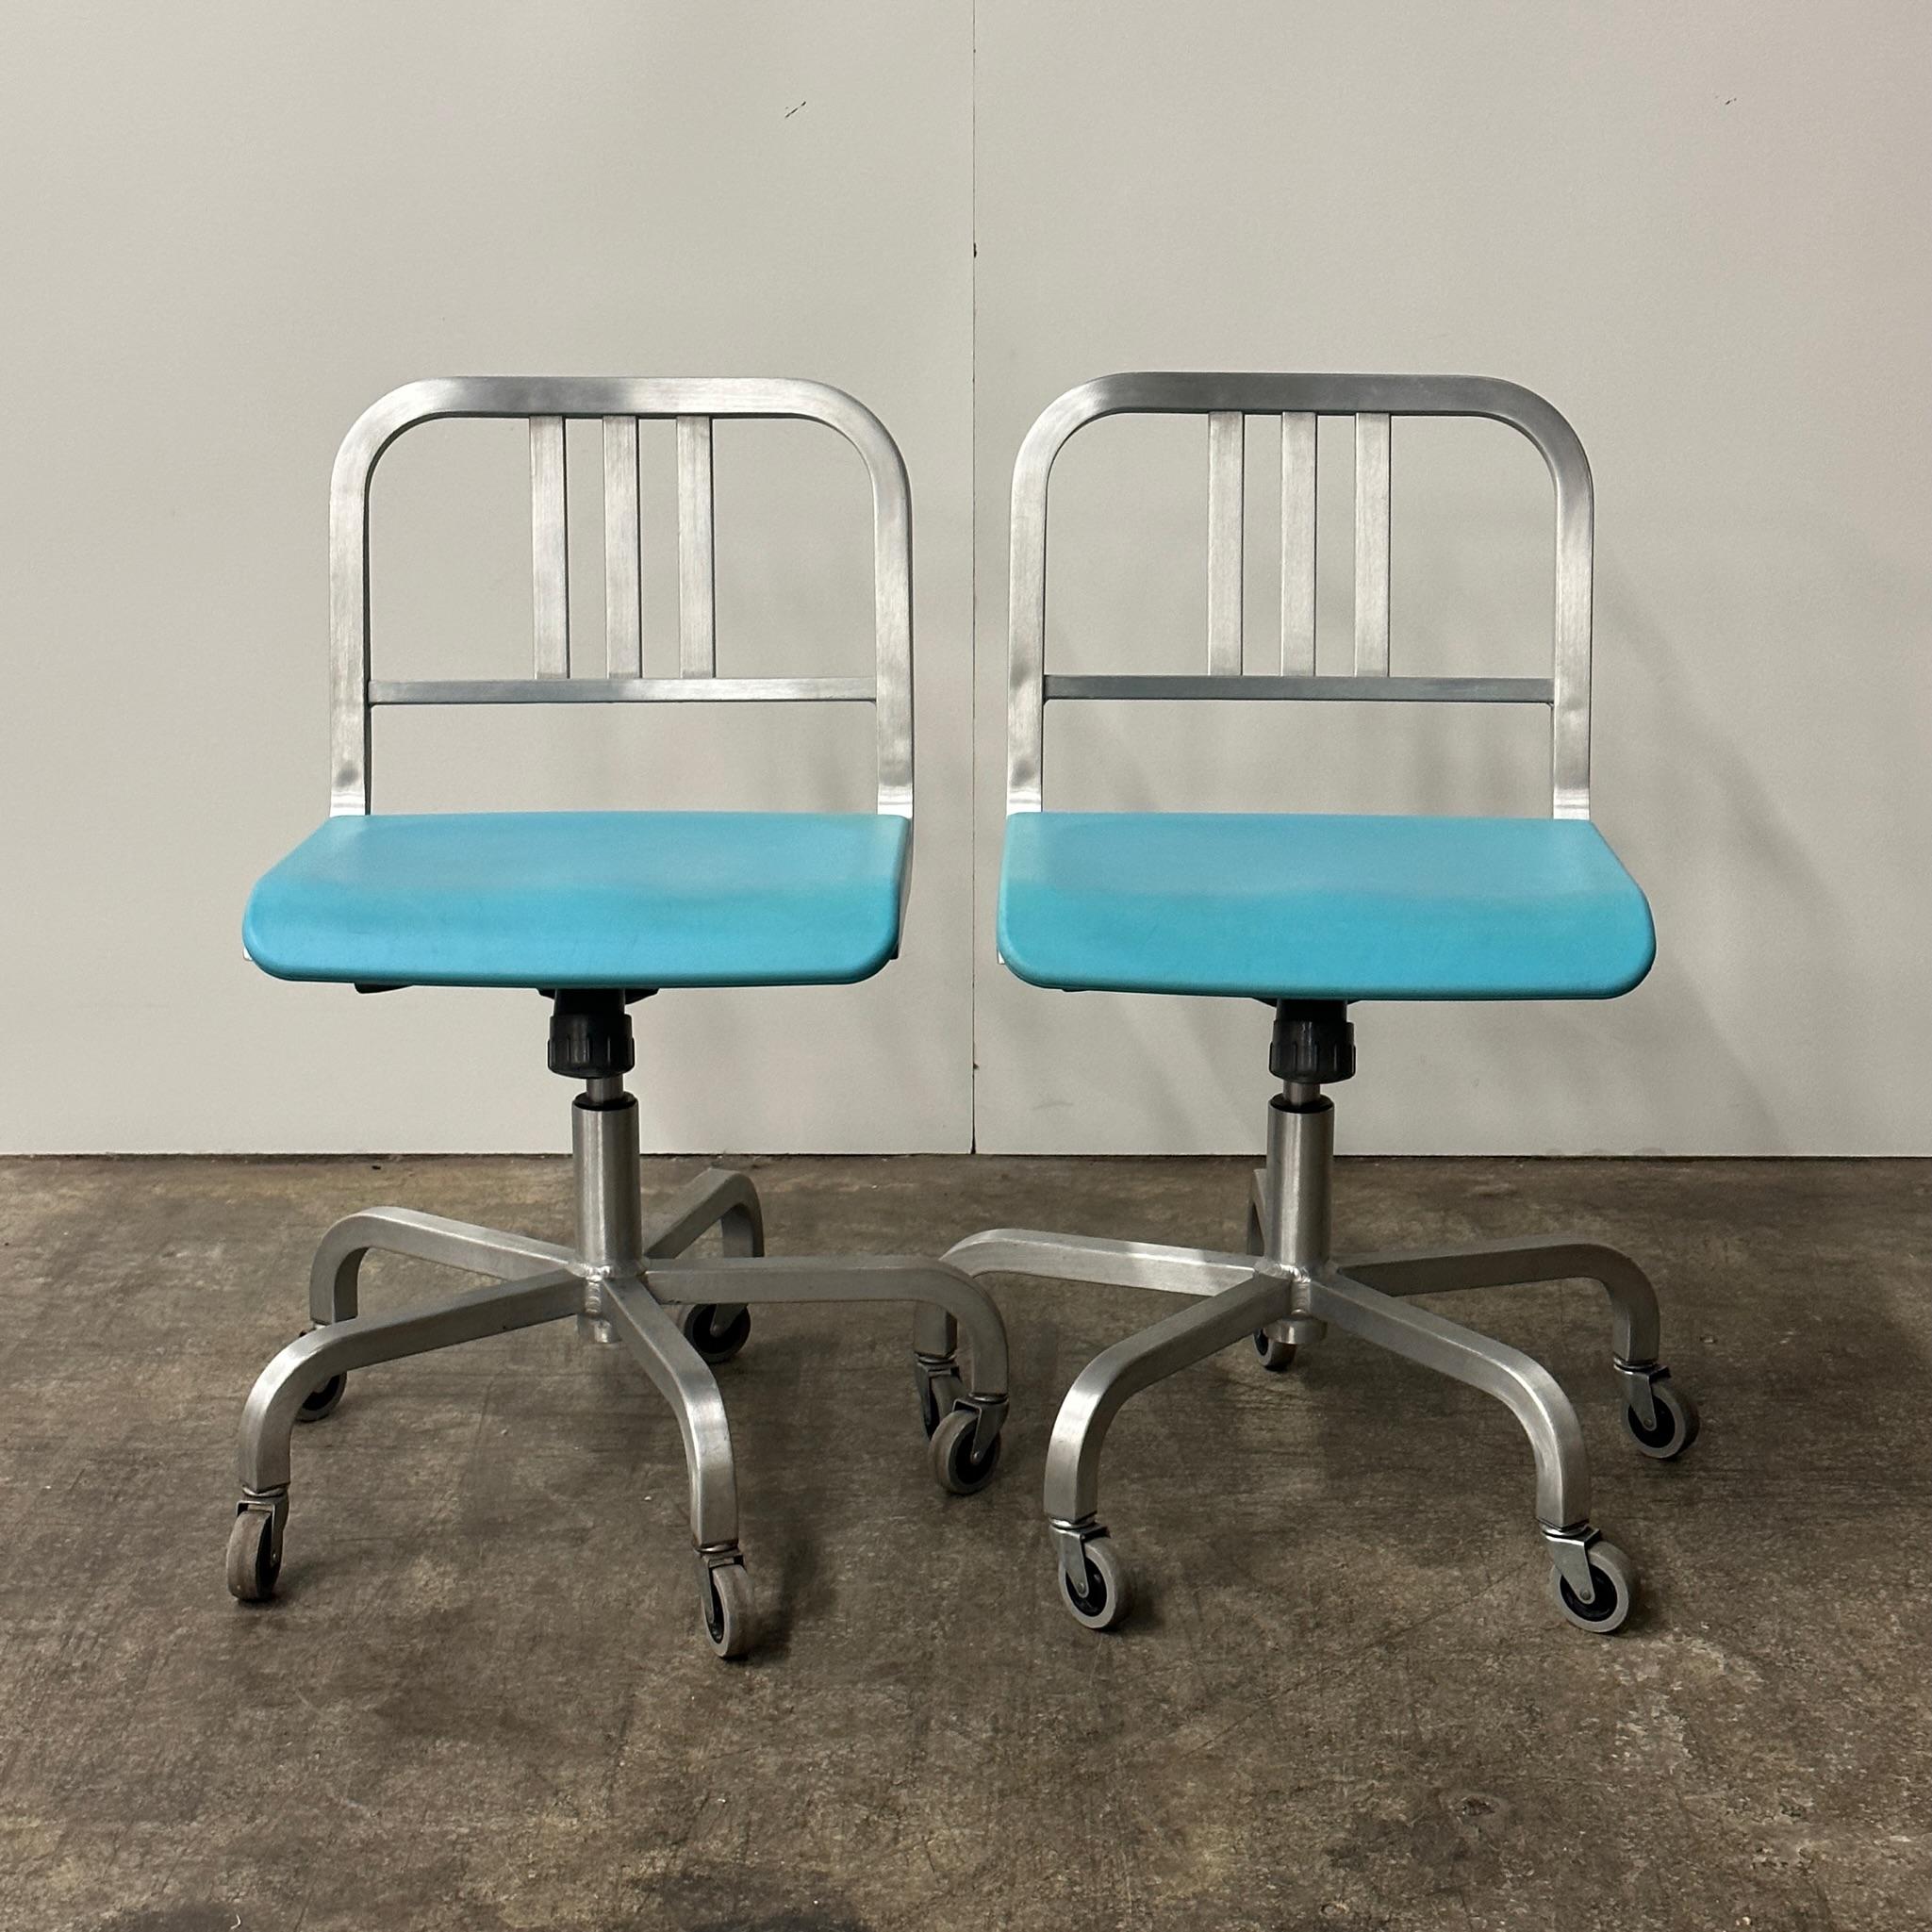 Aluminum construction with seat pad in blue.

Price is for the set. Contact us if you'd like to purchase a single item.